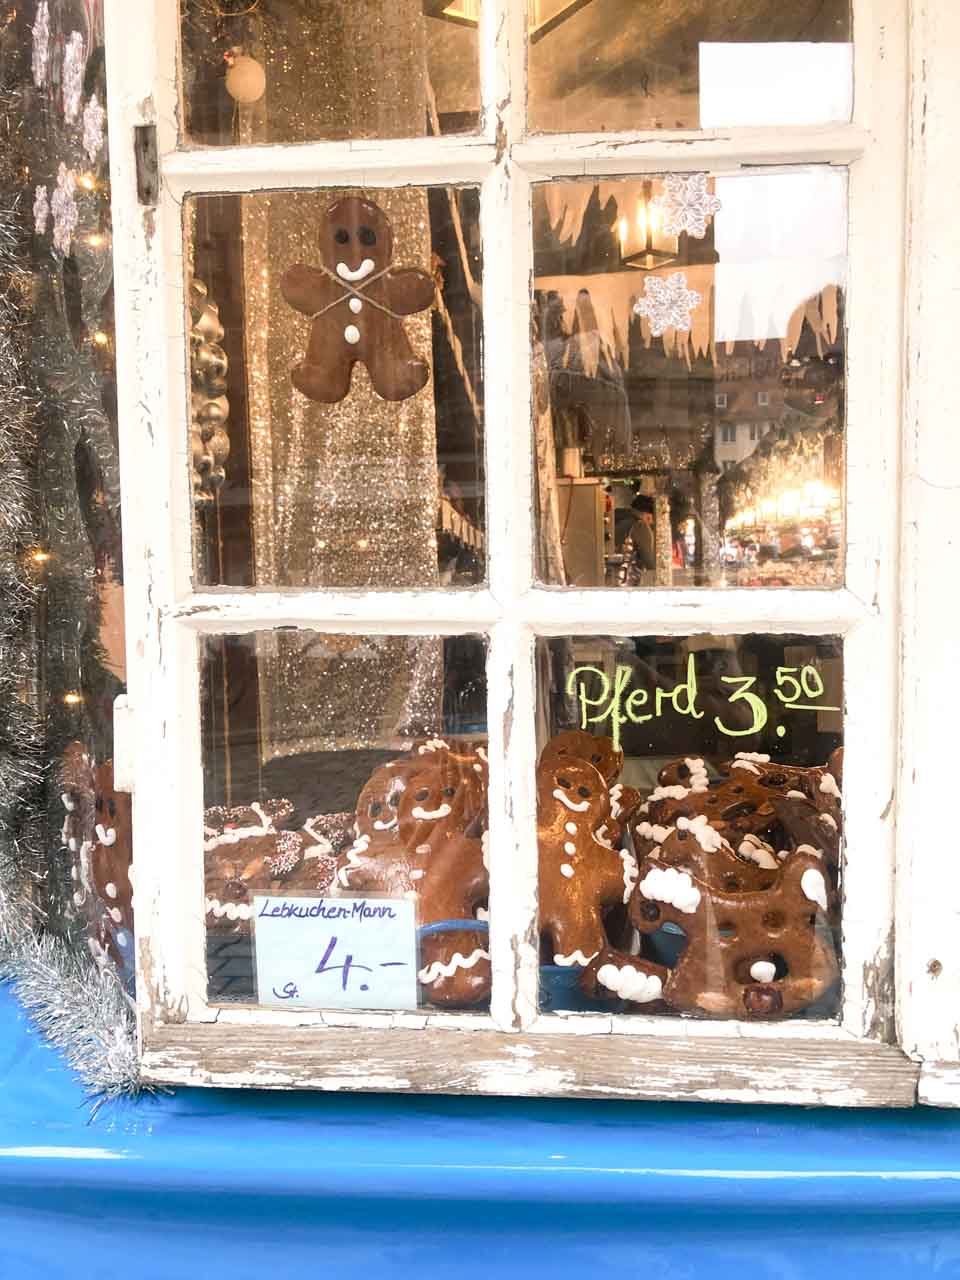 Handmade gingerbread men decorated with white icing, displayed in an old-fashioned shop window at the Nuremberg Christmas Market